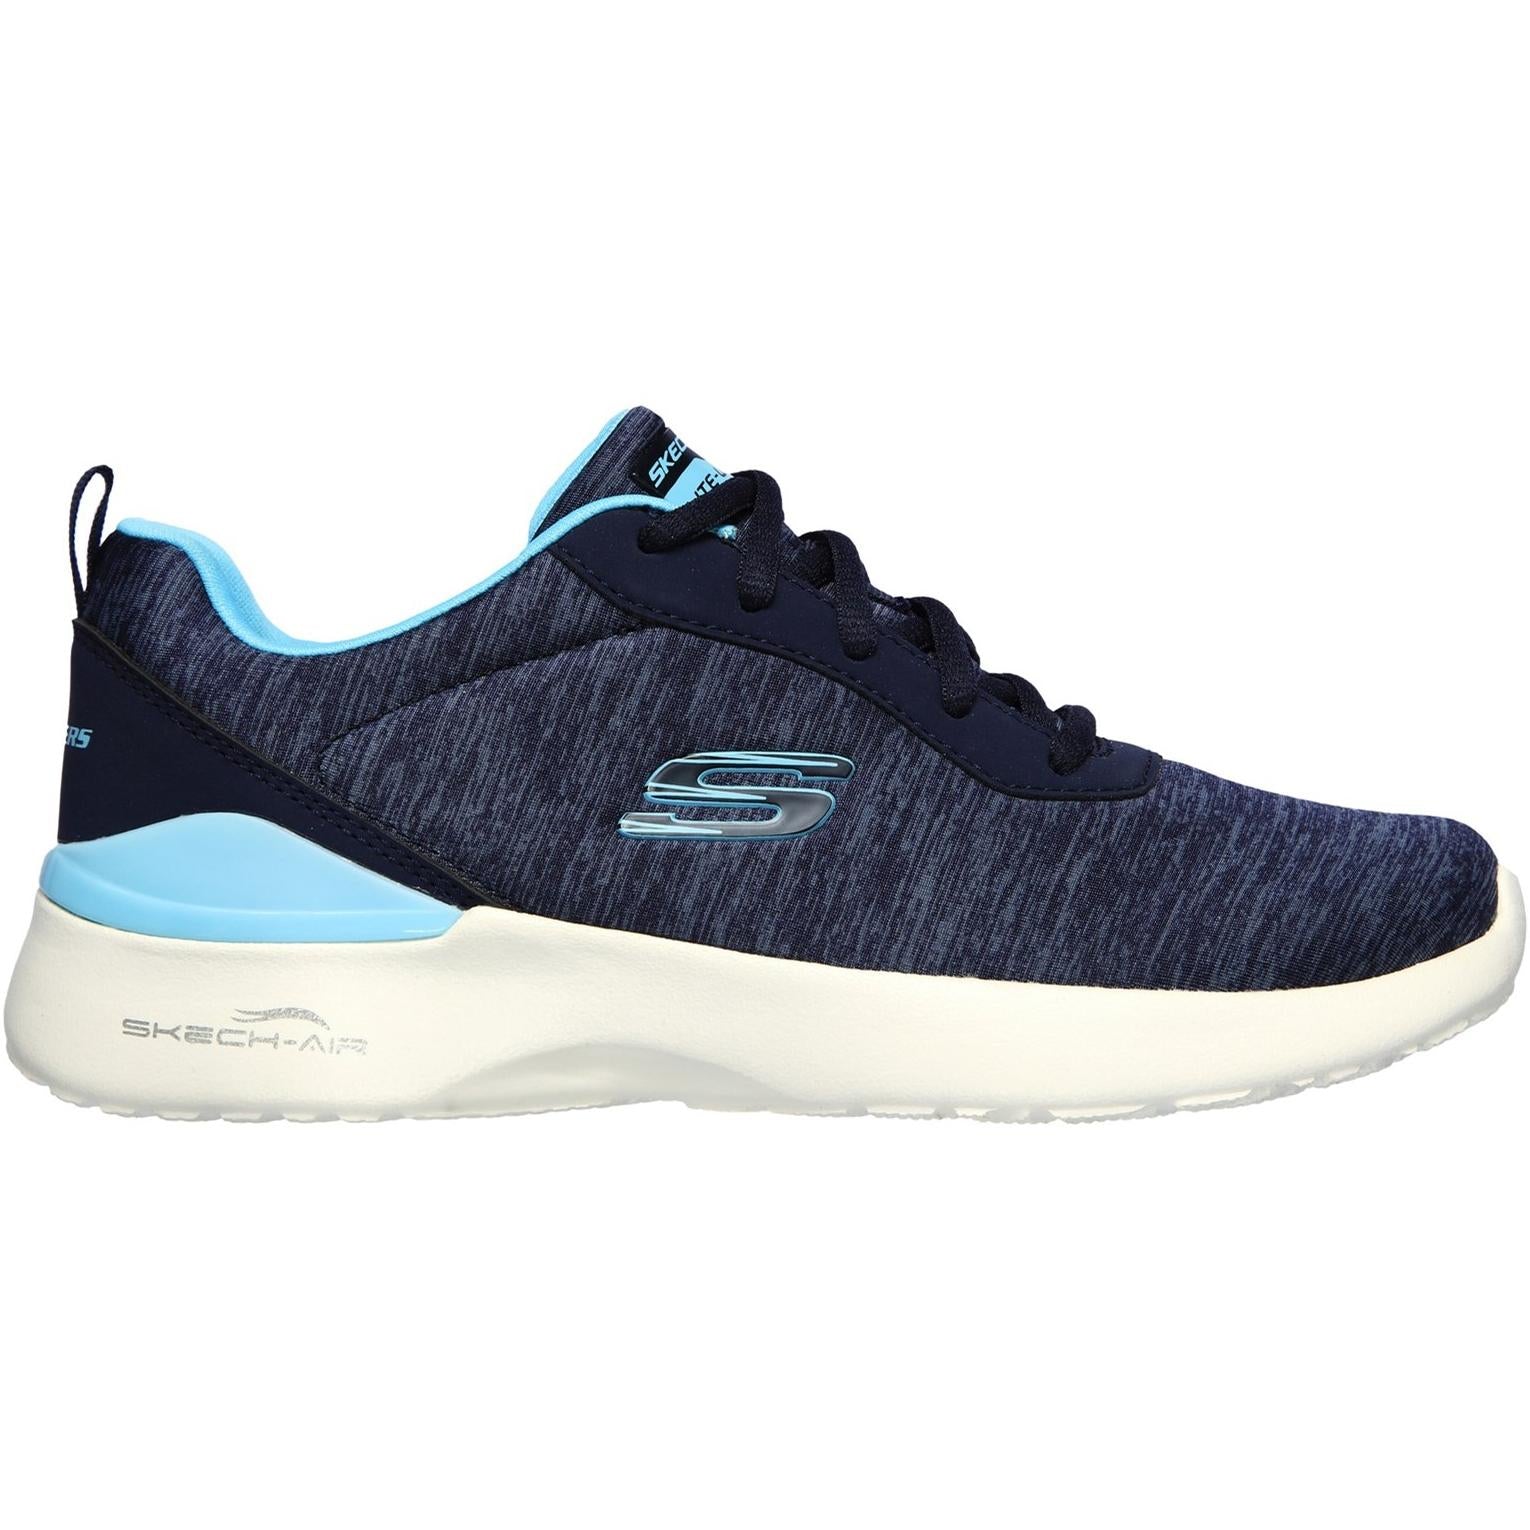 Skechers Skech-Air Dynamight Paradise Waves Sport Shoes